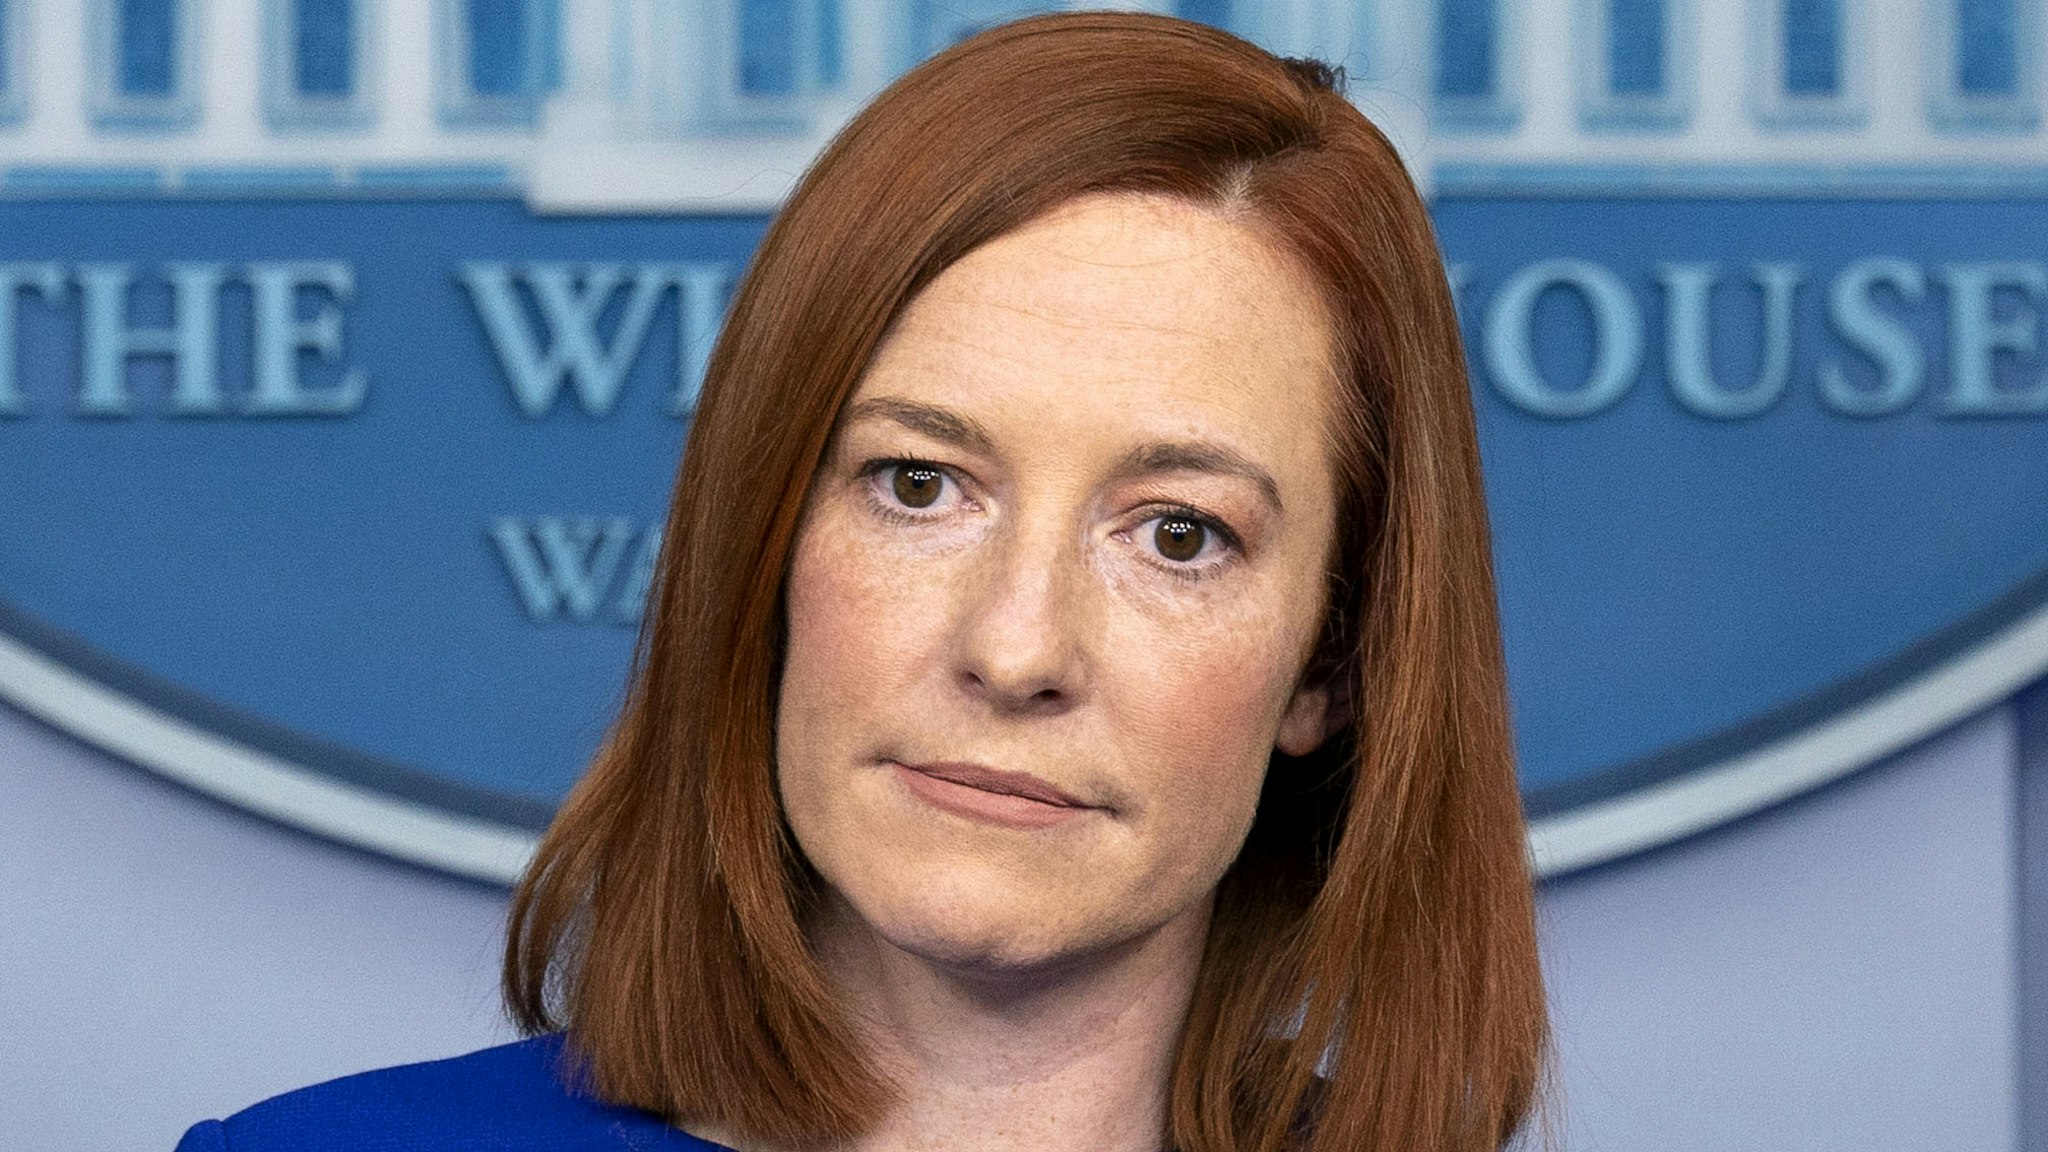 Jen Psaki, White House press secretary, pauses during a news conference in the James S. Brady Press Briefing Room at the White House in Washington, D.C., U.S., on Wednesday, Jan. 20, 2021. Joe Biden began his presidency with a soaring appeal to end Americas "uncivil war" and reset the tone in Washington, delivering an inaugural address that dispensed with a laundry list of policy goals to instead confront the nation's glaring political divides as the foremost obstacle to moving the country forward.